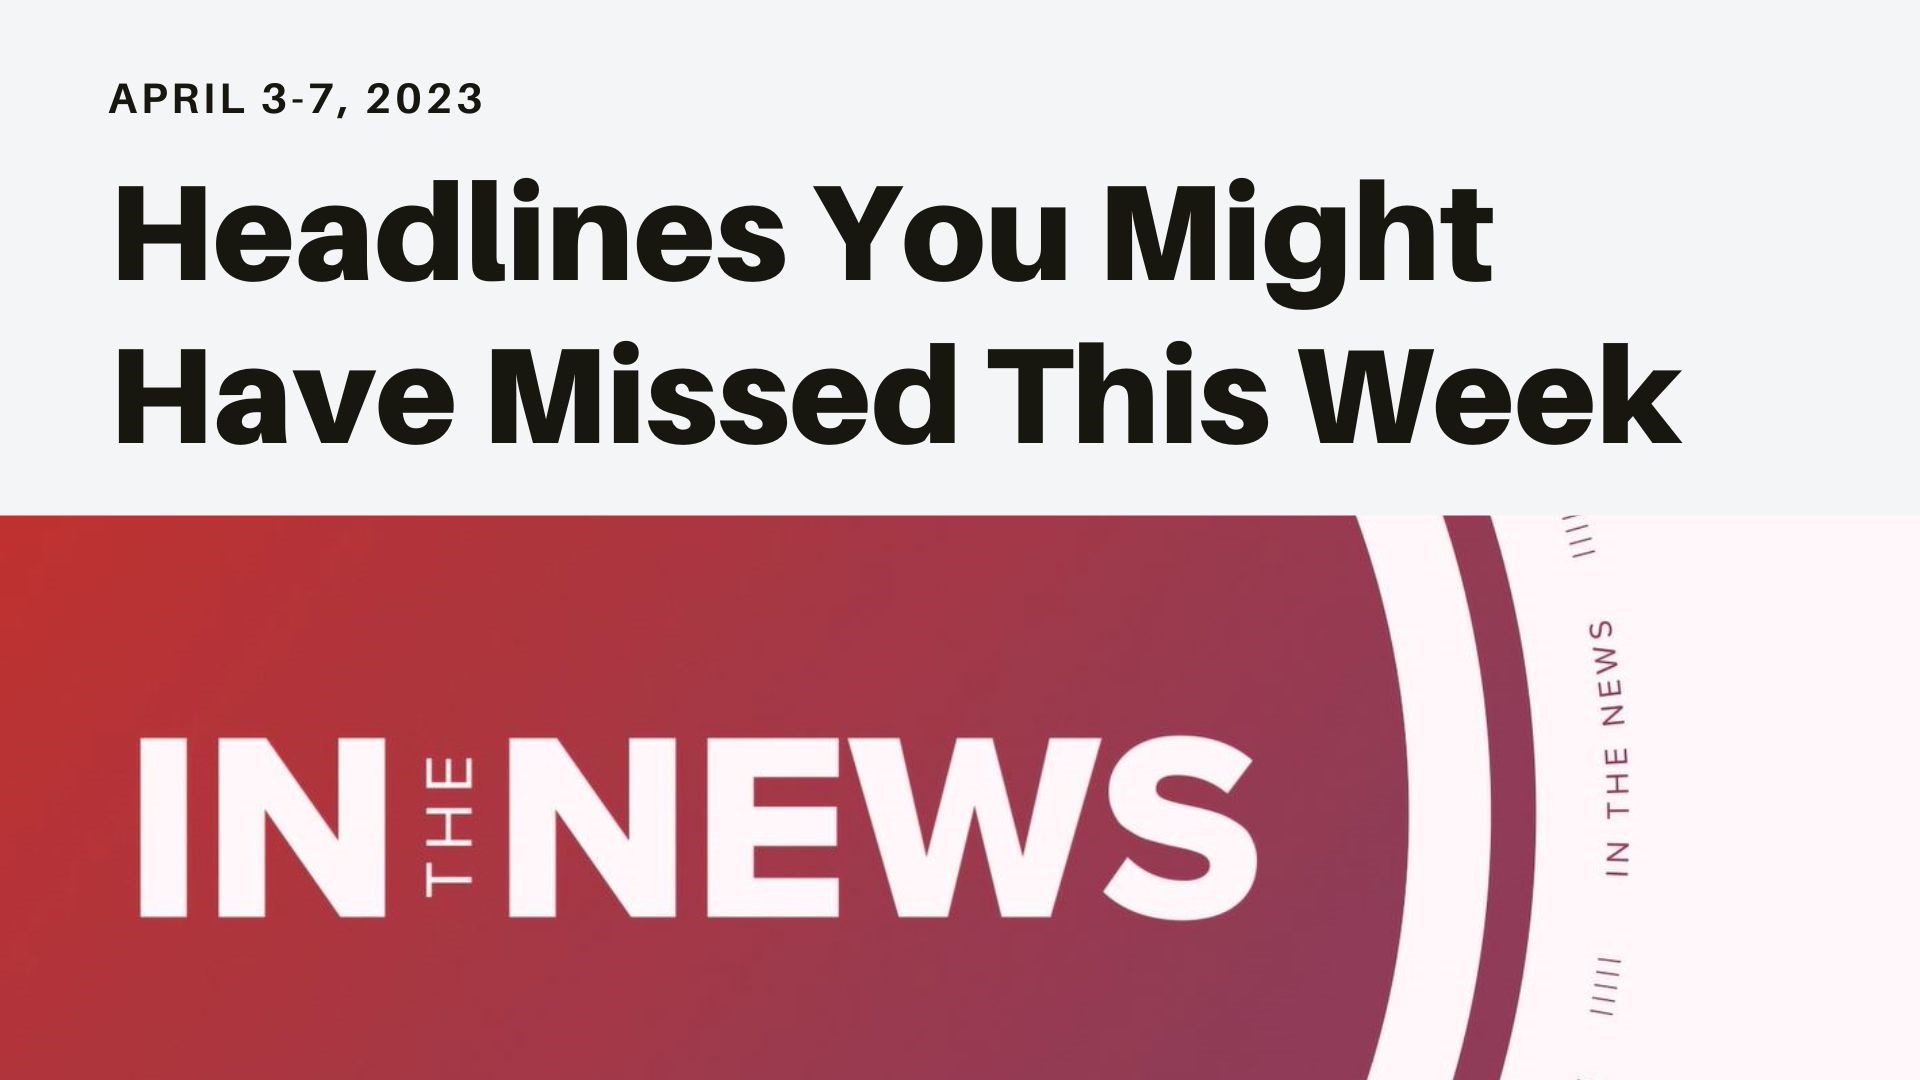 A look at the headlines you might have missed this week from Trump's arraignment in New York to 2 TN lawmakers expelled and the end of March Madness.